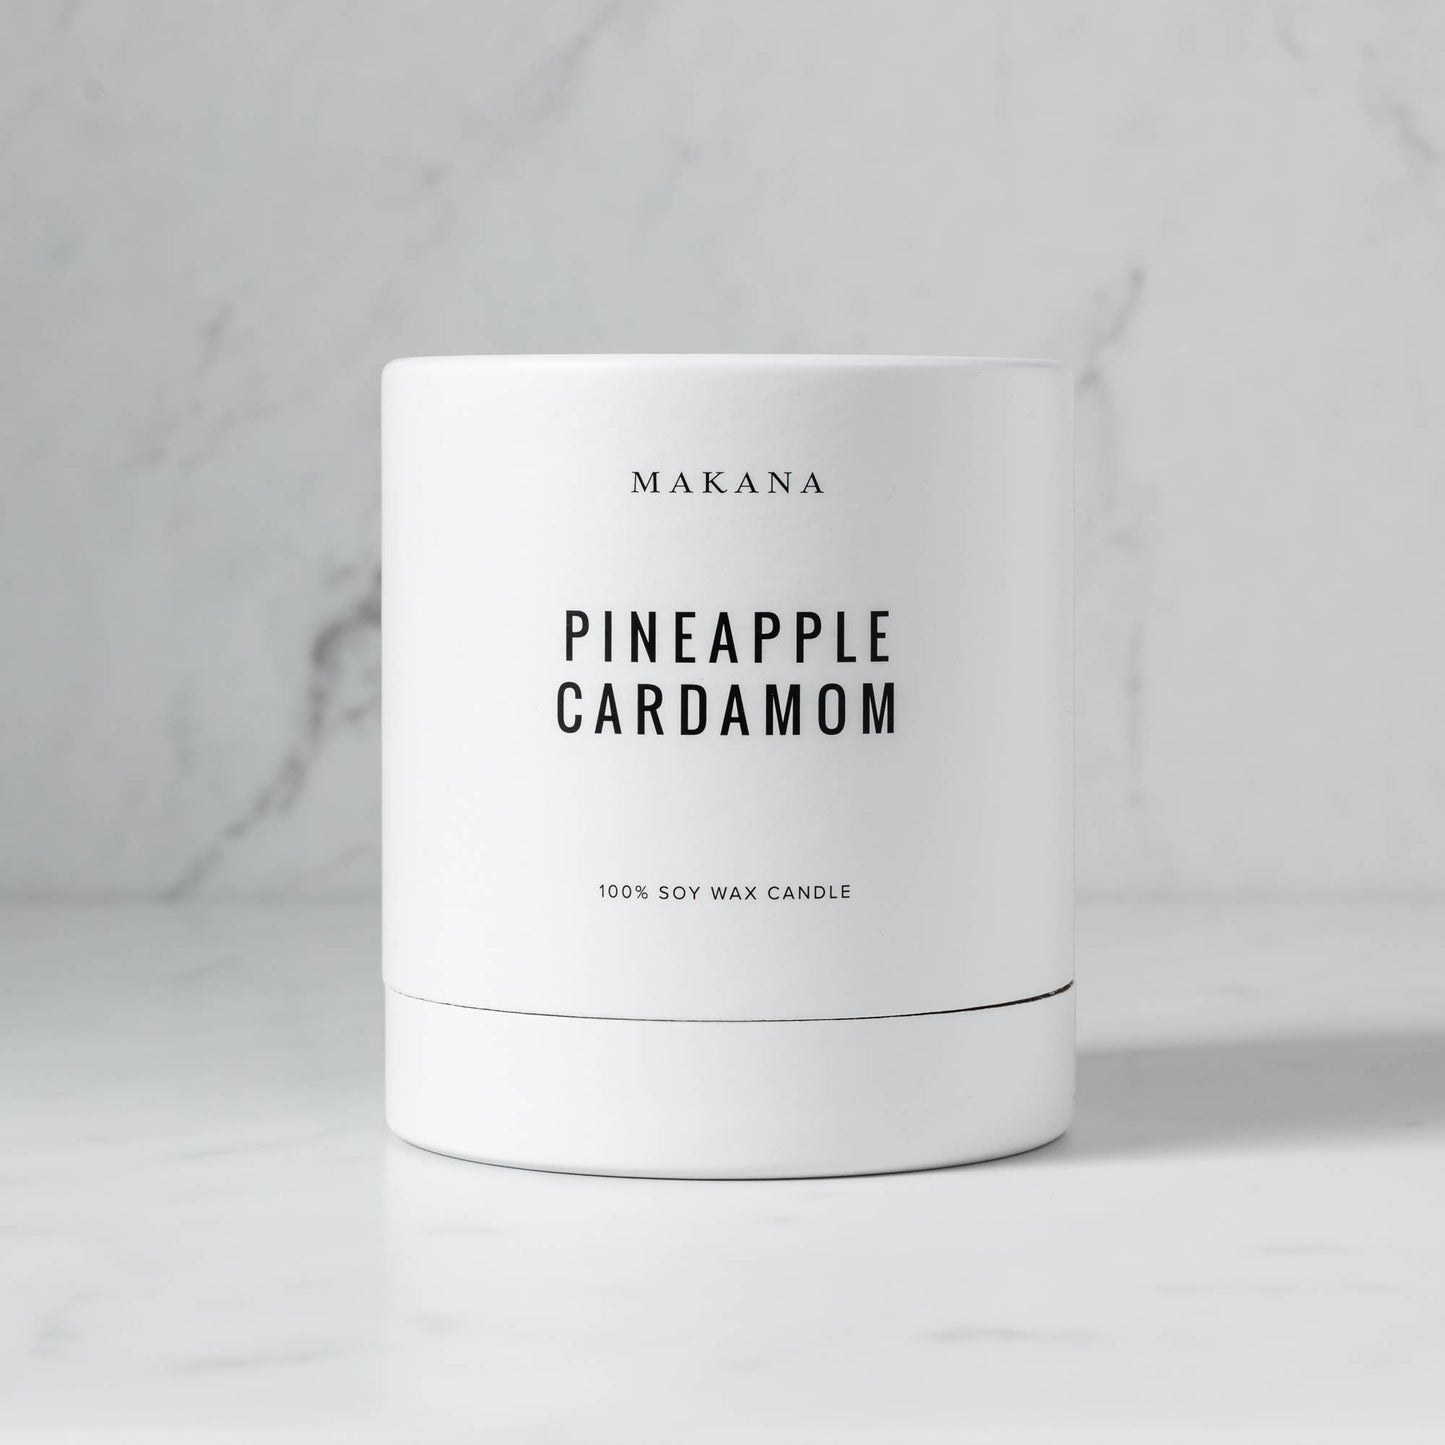 Pineapple Cardamom - Classic Candle 10 oz - Curated Home Decor